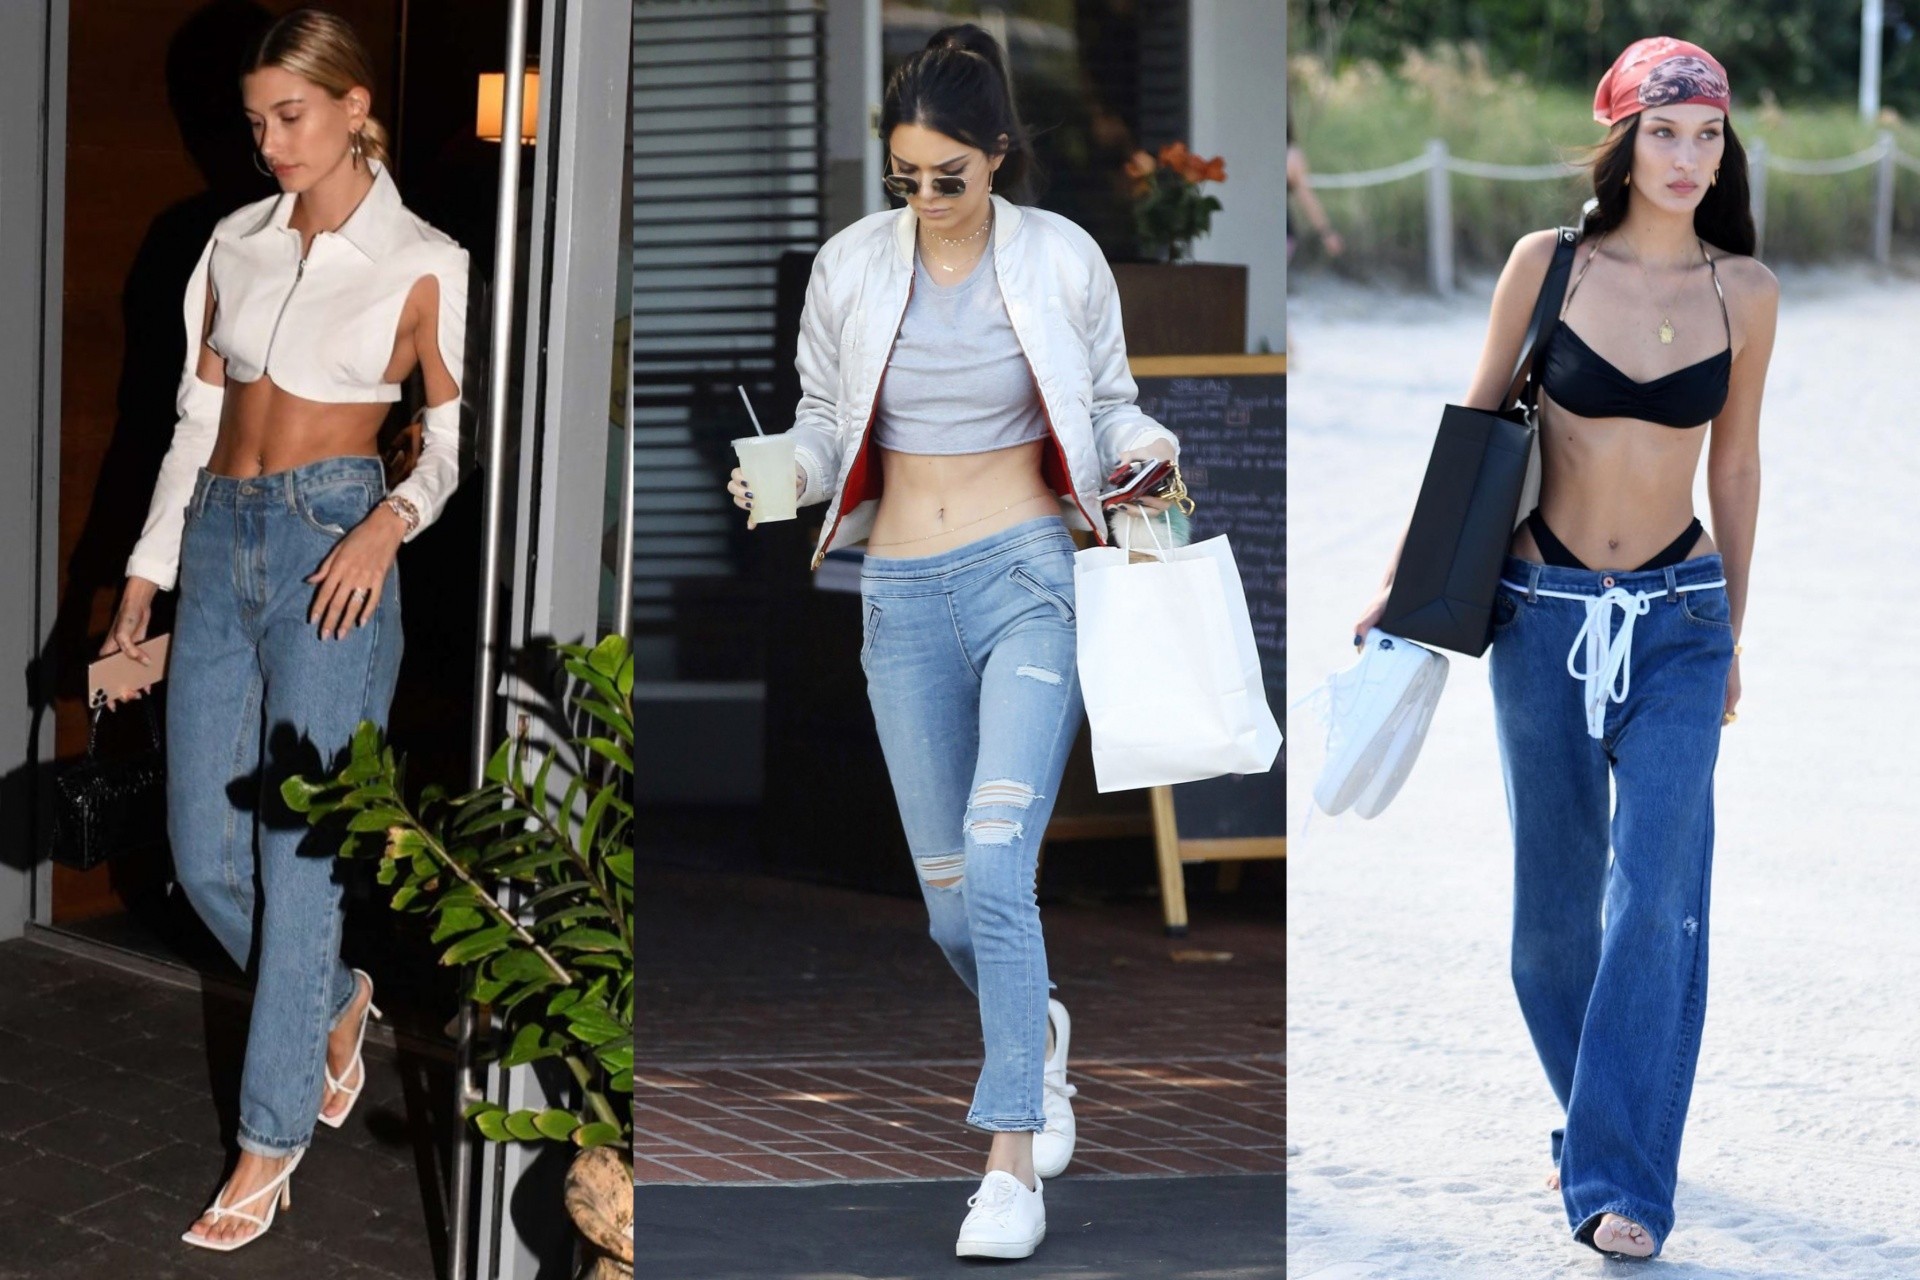 FASHION TRENDS FOR BEAUTY 2023 - LOW-RISE JEANS